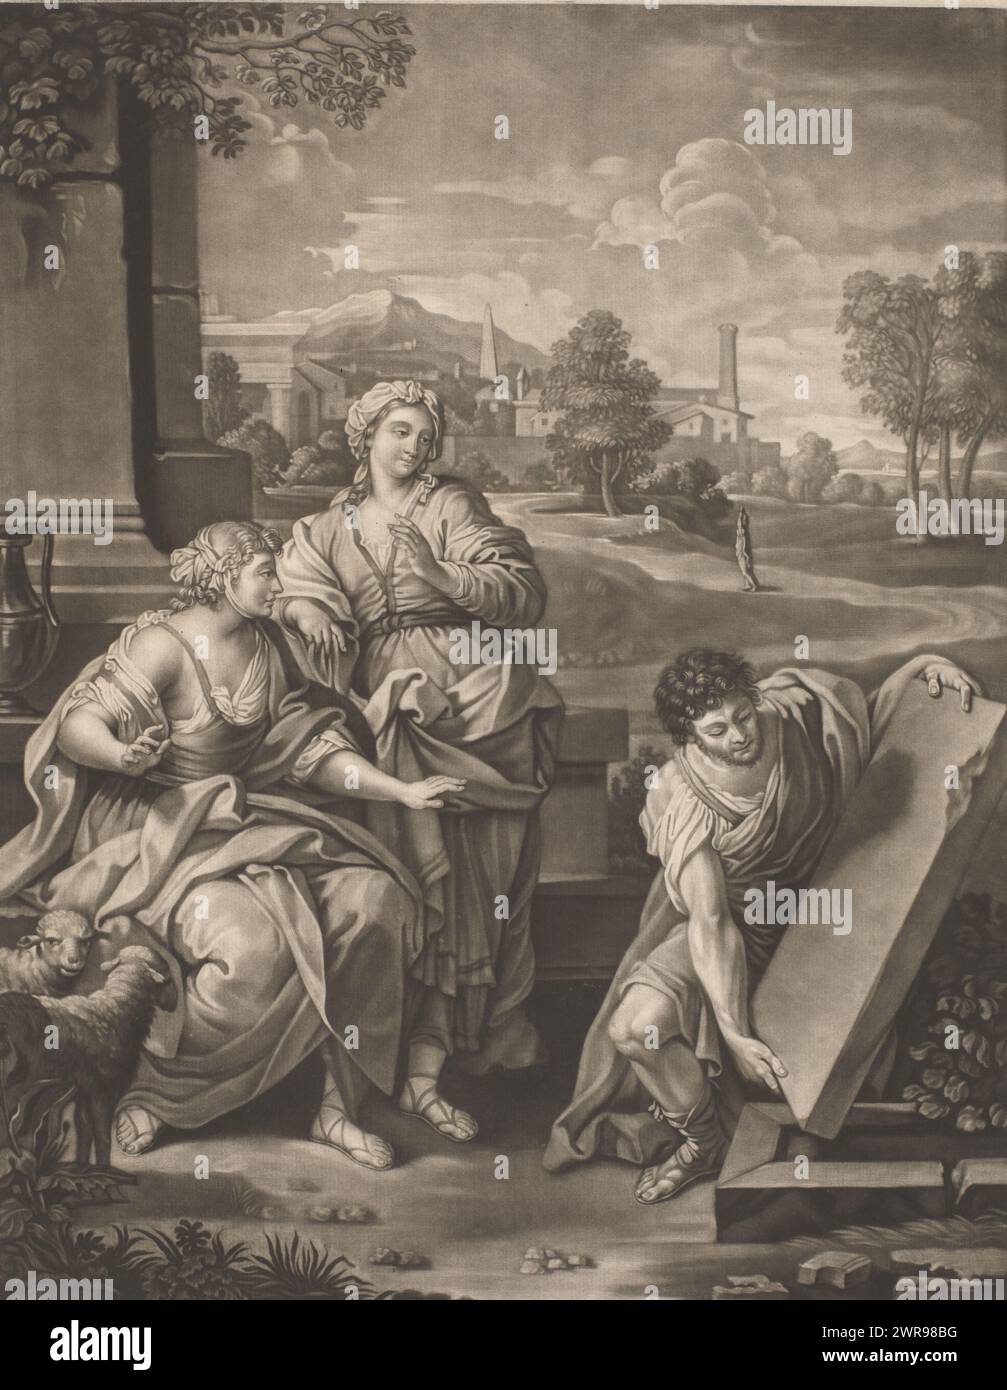 Jacob lifts the stone from the well, on the left are Rachel and another woman., print maker: John Finlayson, after design by: Pietro Antonio de Pietri, England, 1772, paper, height 495 mm × width 351 mm, print Stock Photo